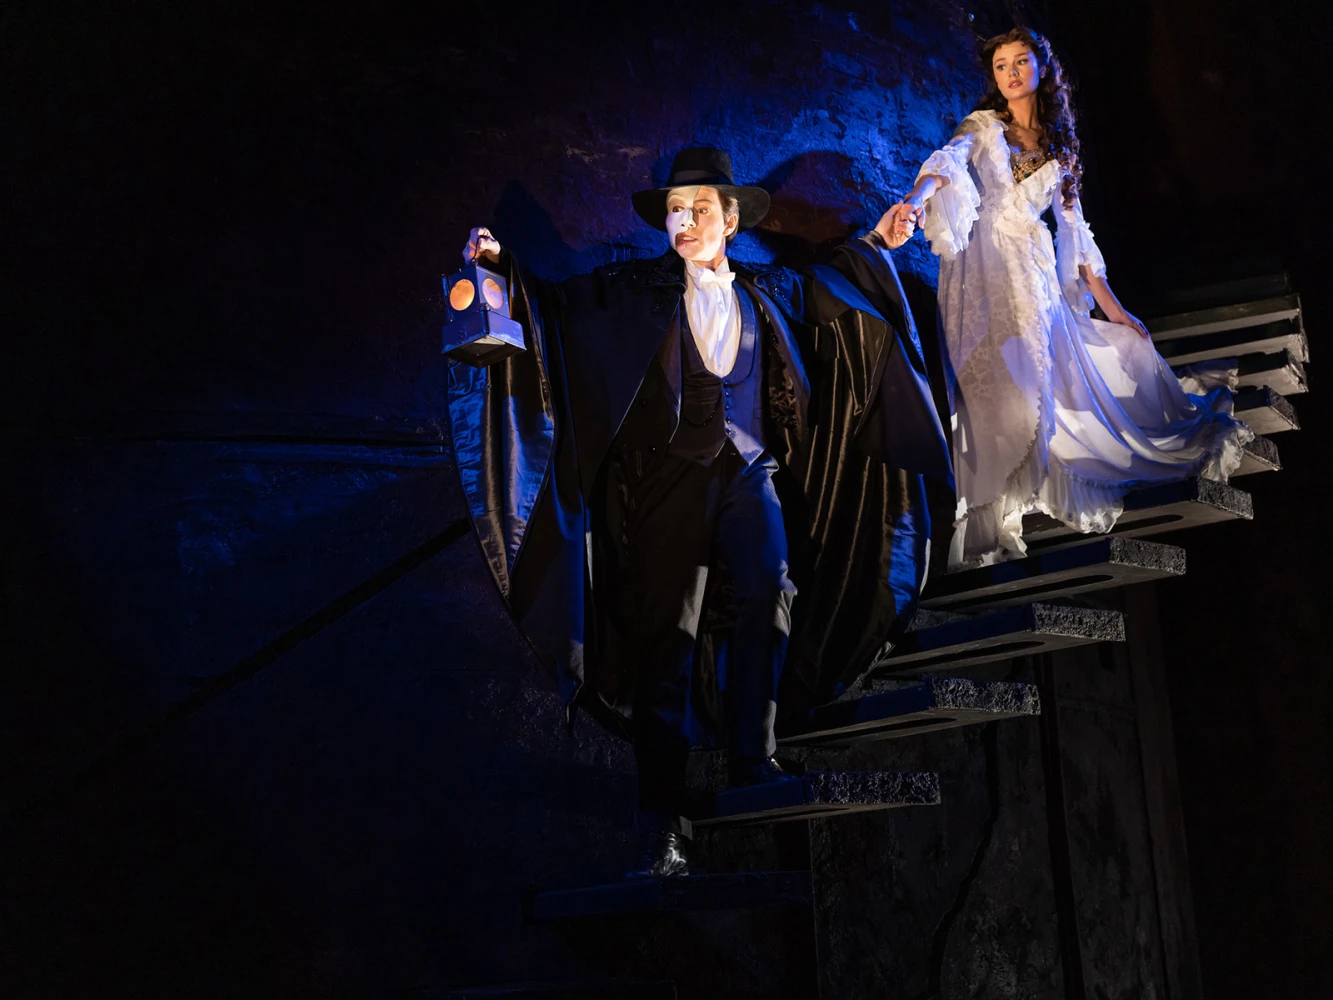 The Phantom of the Opera: What to expect - 7